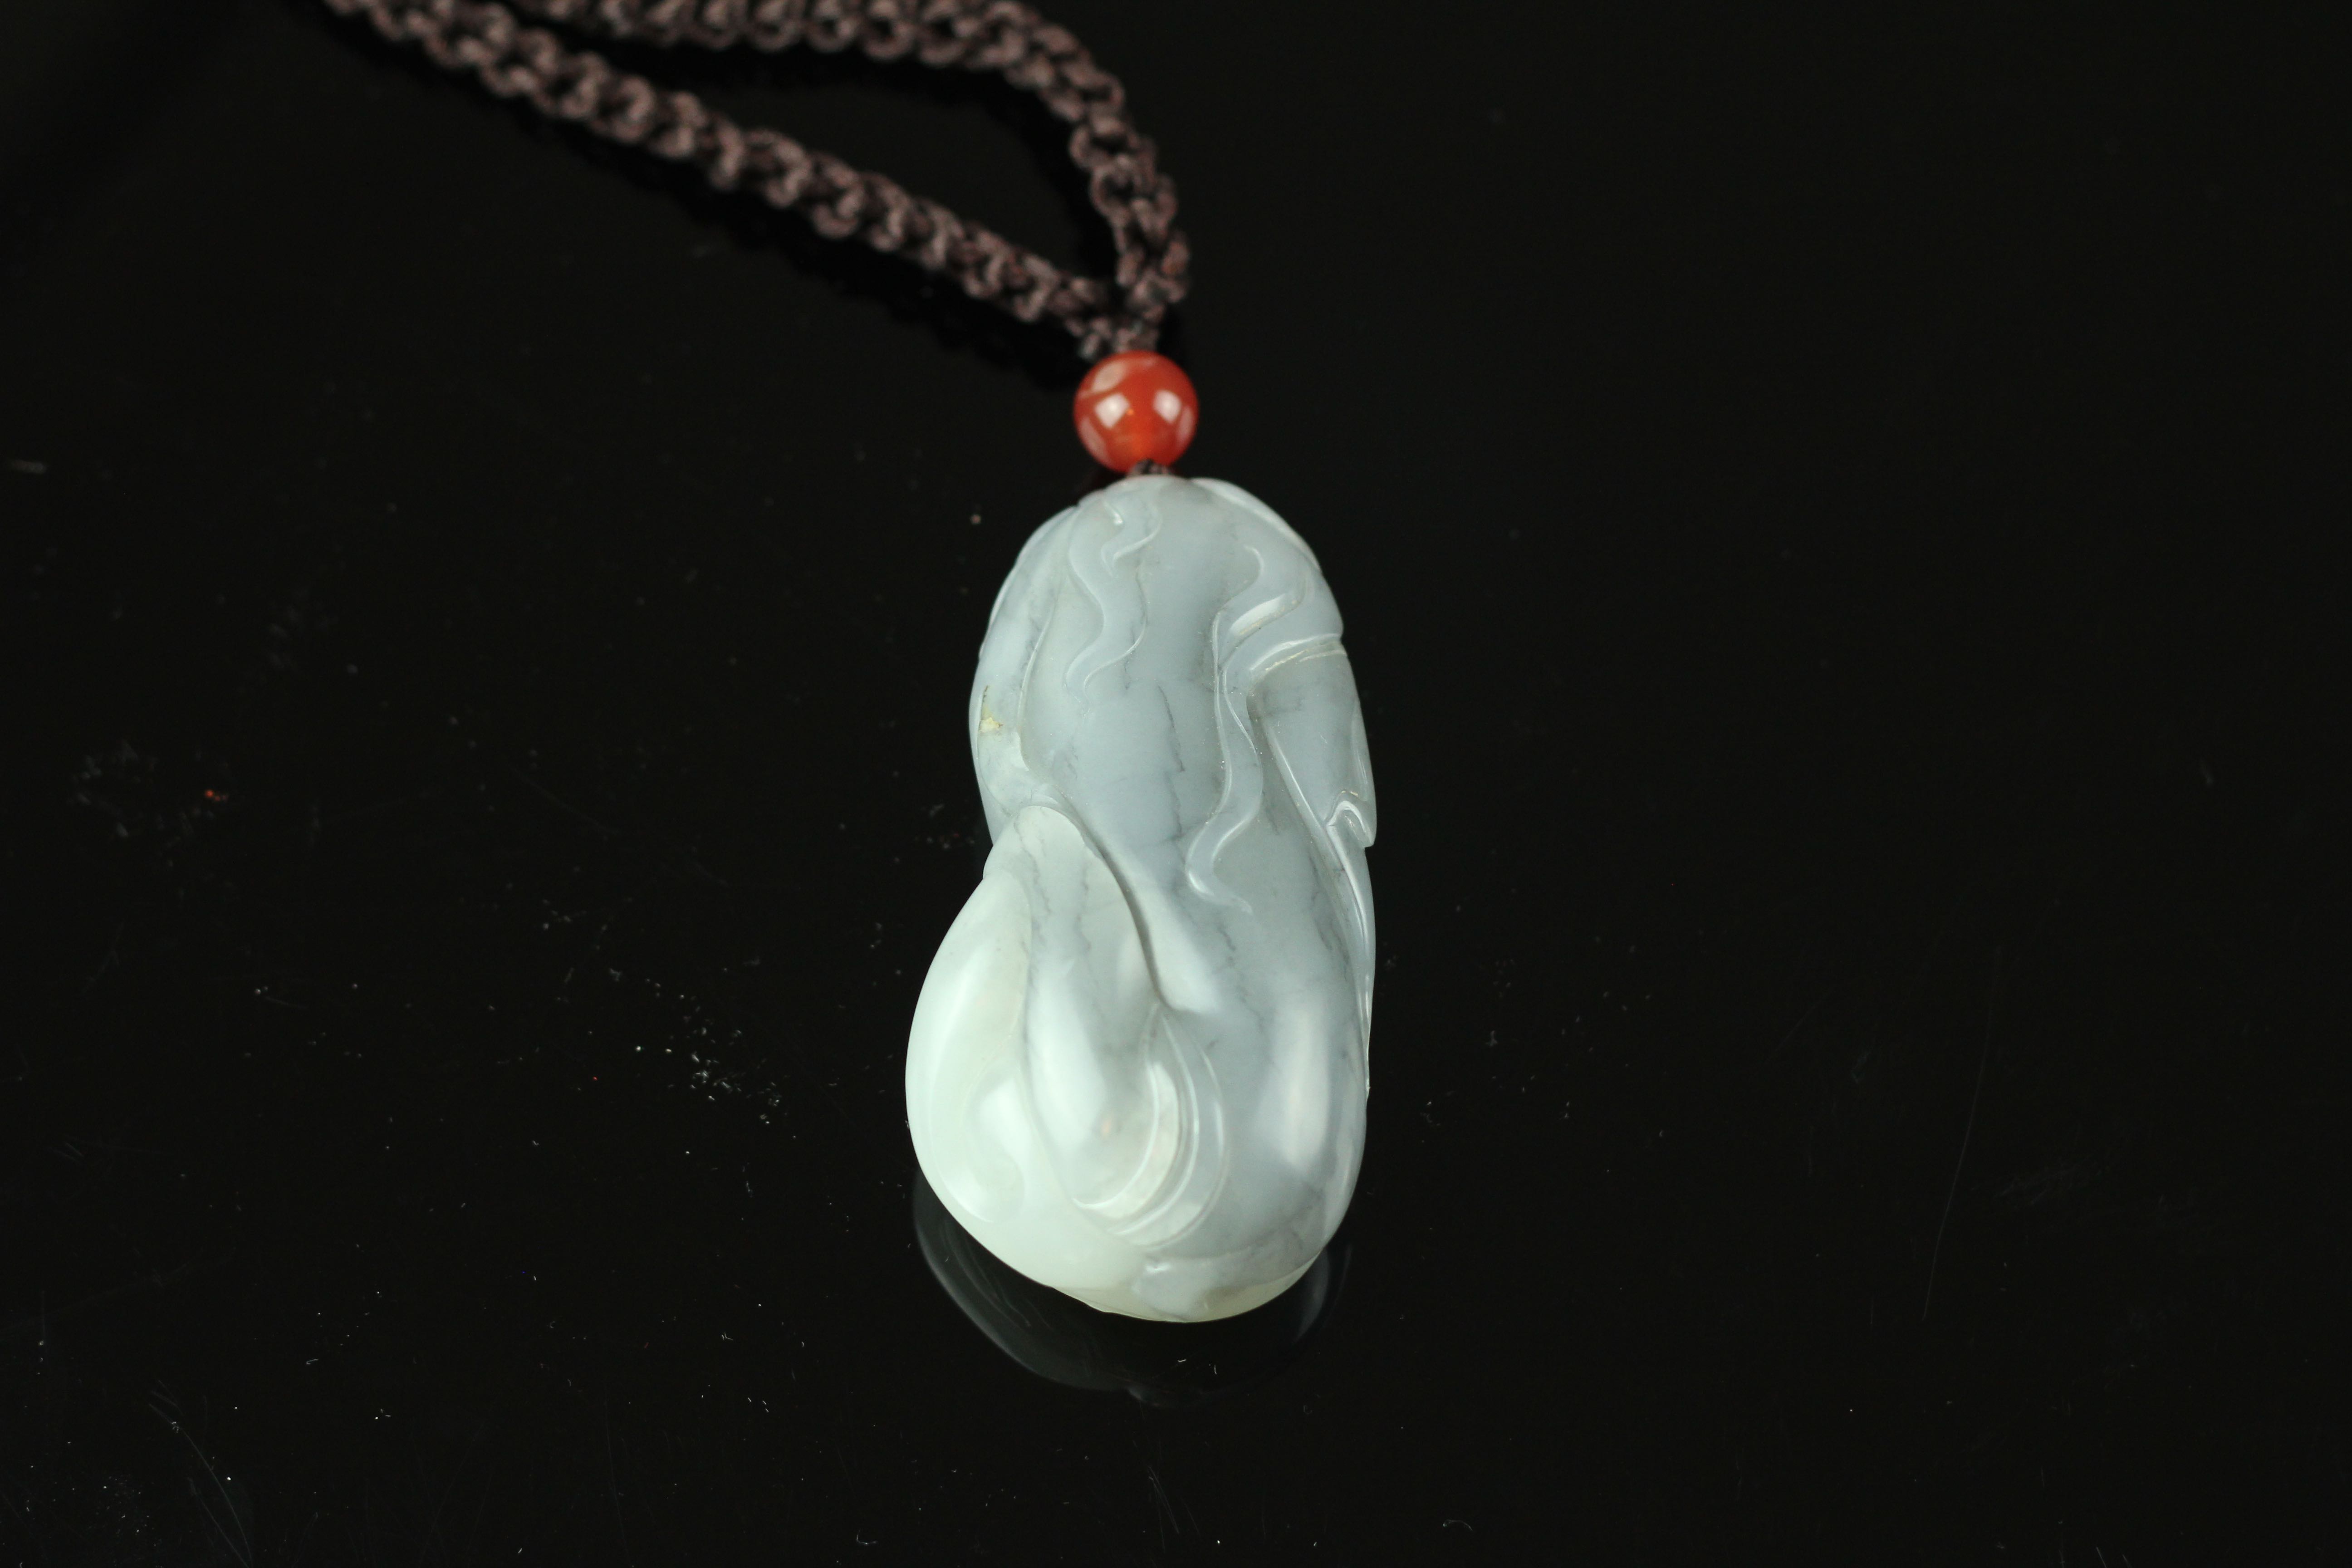 A Chinese XINJIANG HETIAN White and Black Jade Pendant - Image 3 of 3